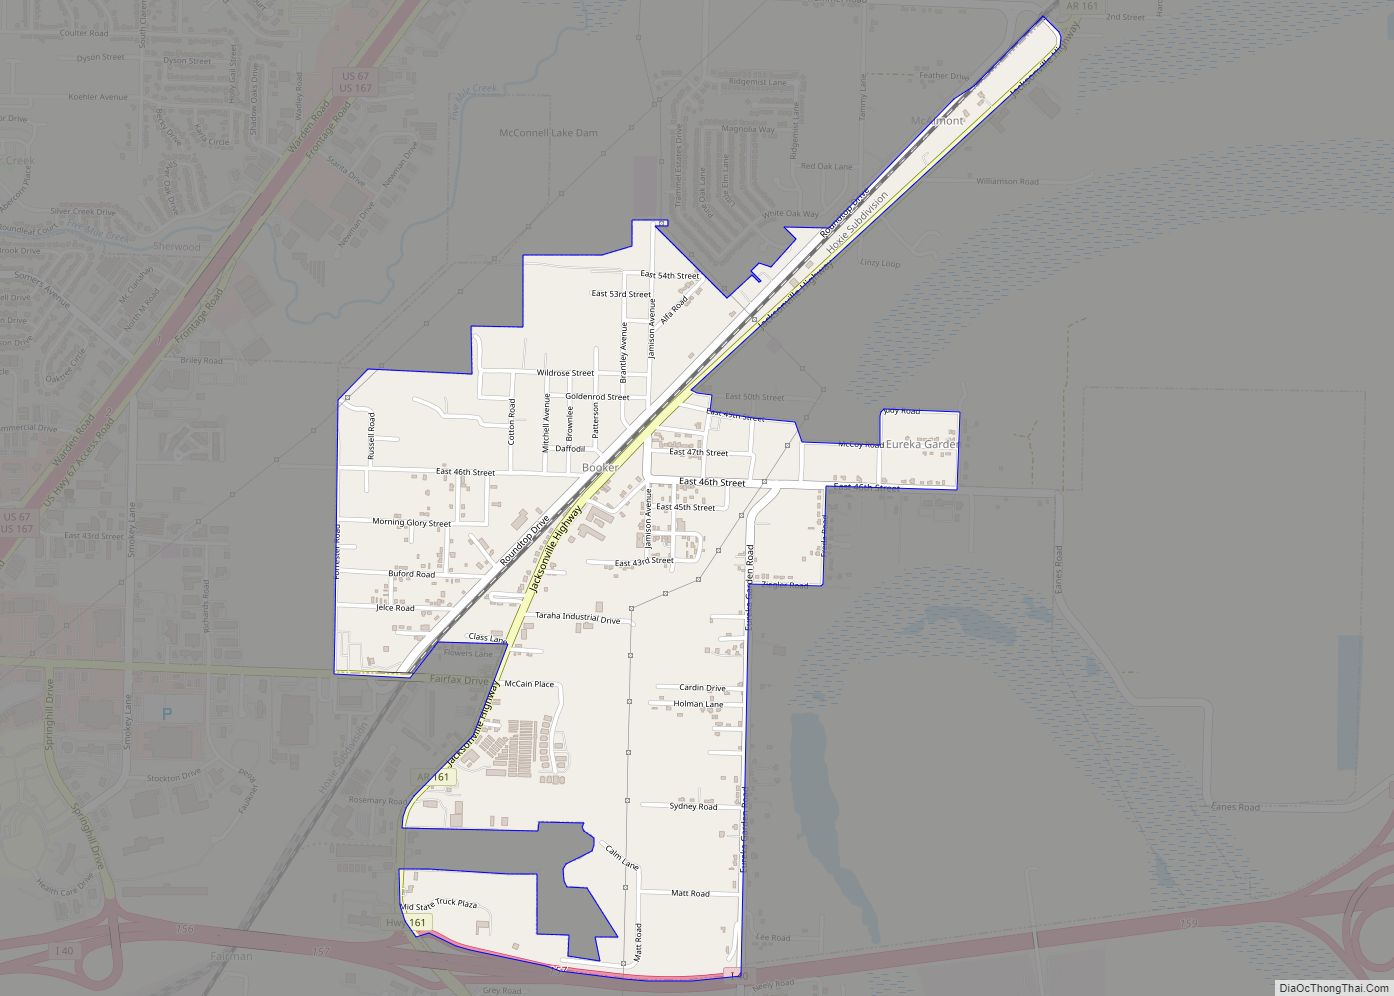 Map of McAlmont CDP